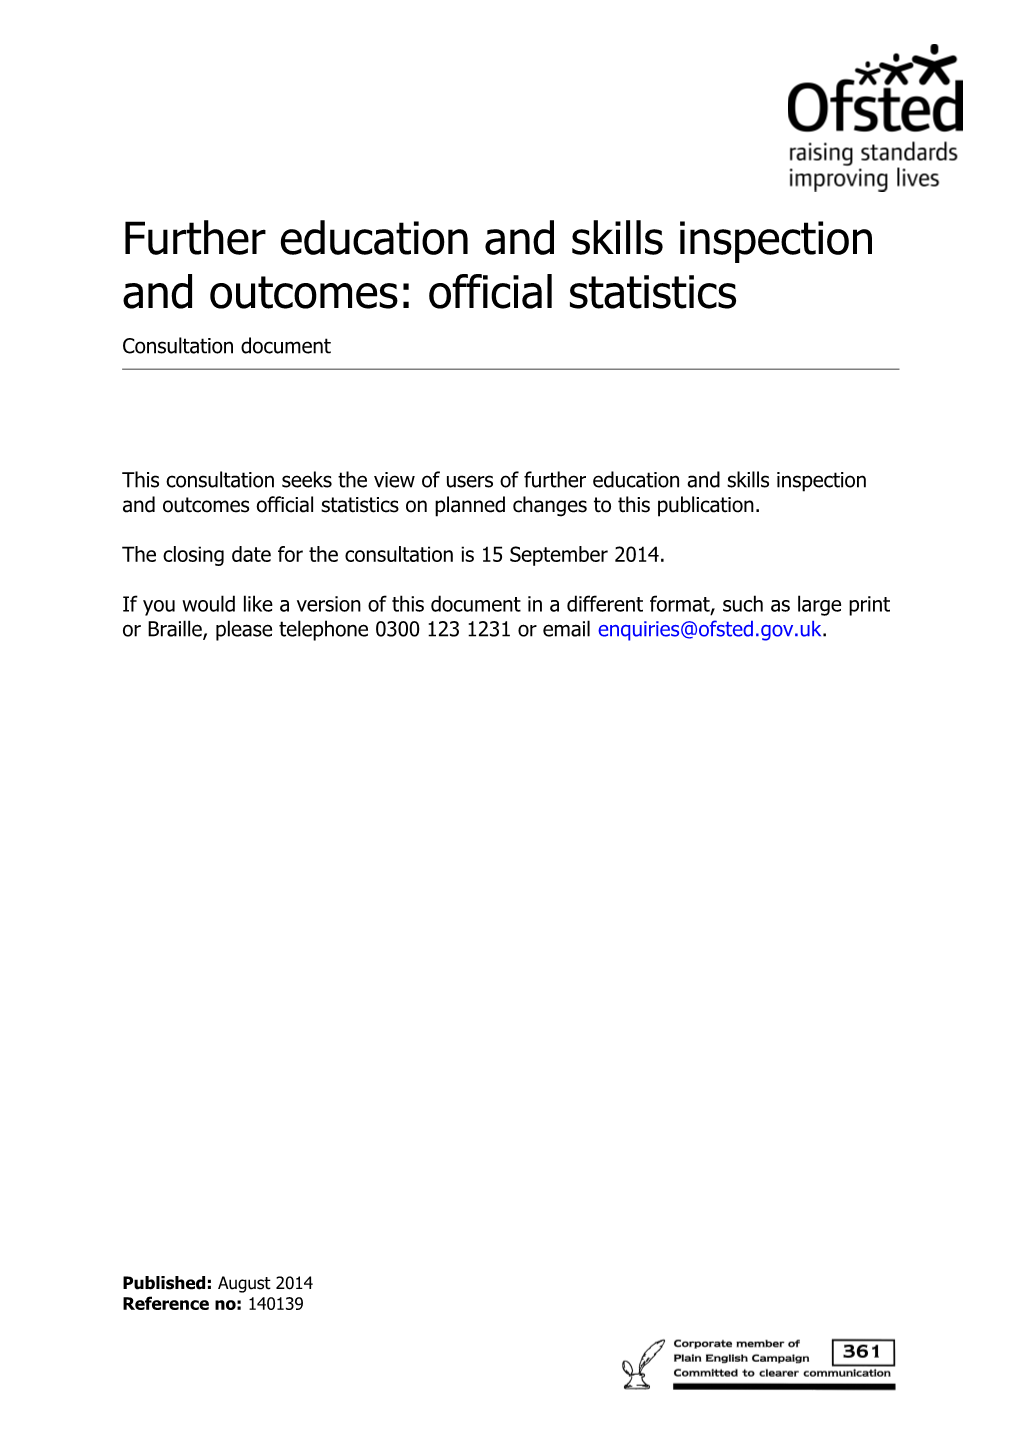 Further Education and Skills Inspection and Outcomes: Official Statistics